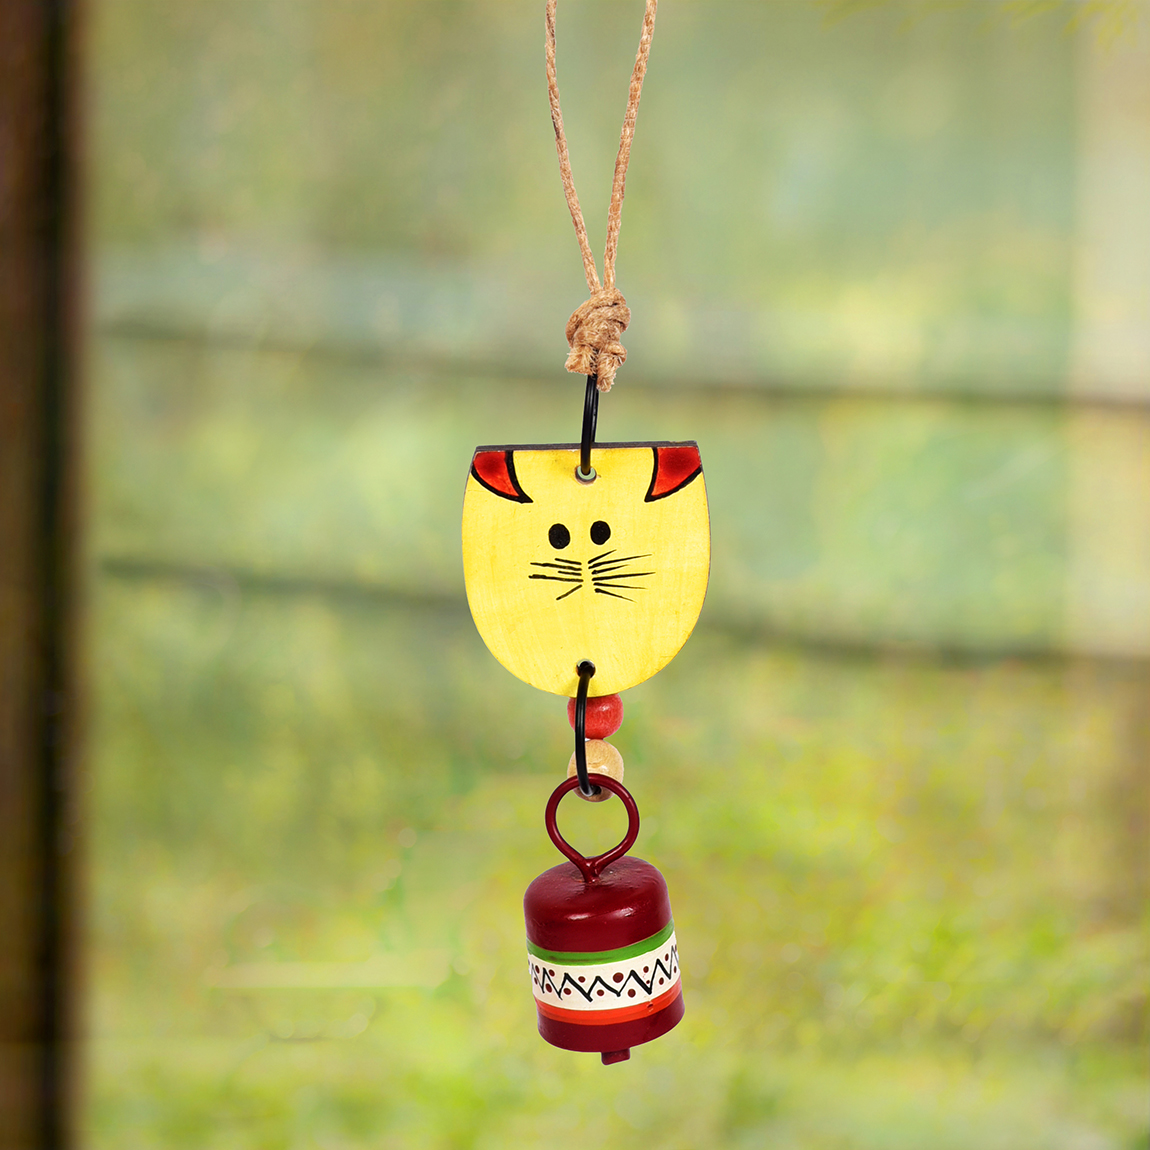 Moorni Art Creations Handpainted Yellow Wild Cat Wind Chimes with Metal Bell for Outdoor Hanging and Home Decoration